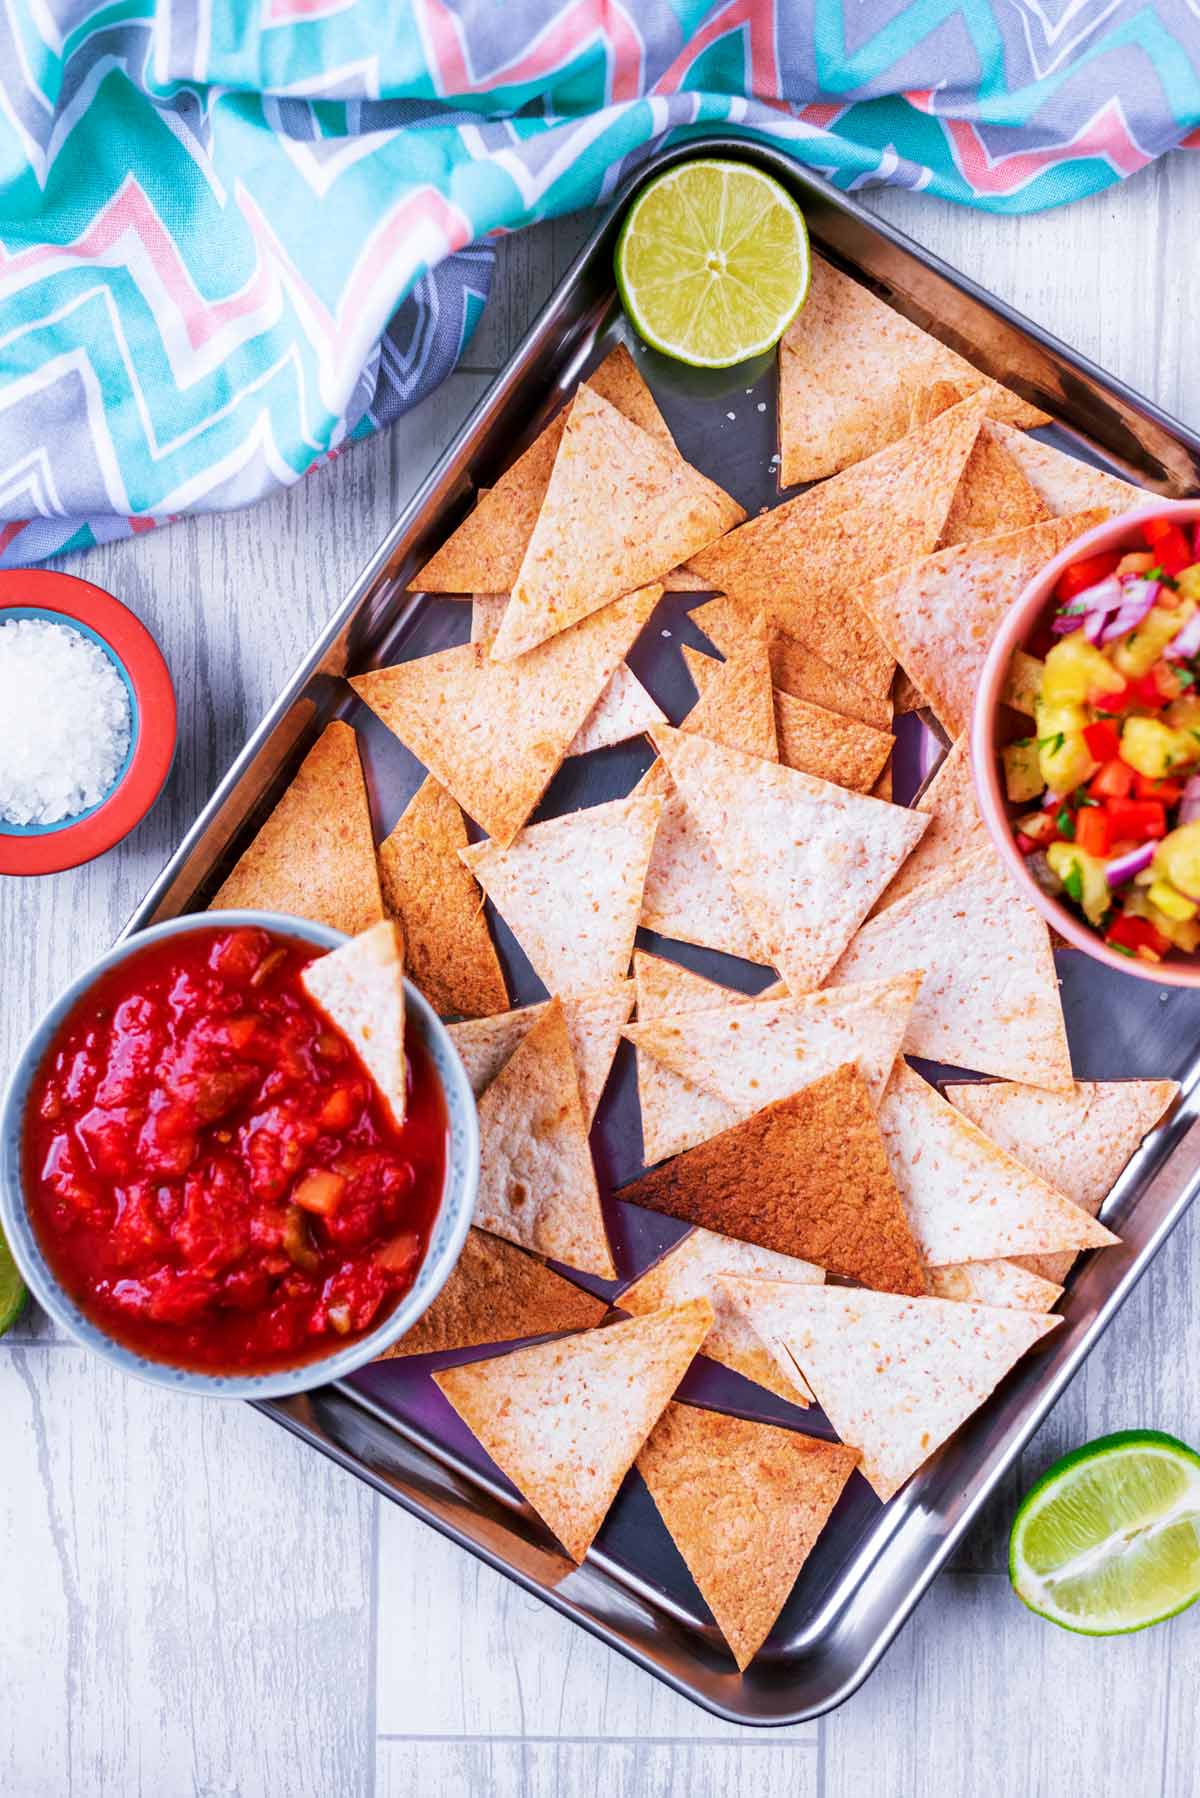 Baked Tortilla Chips on a metal tray with bowls of salsa.